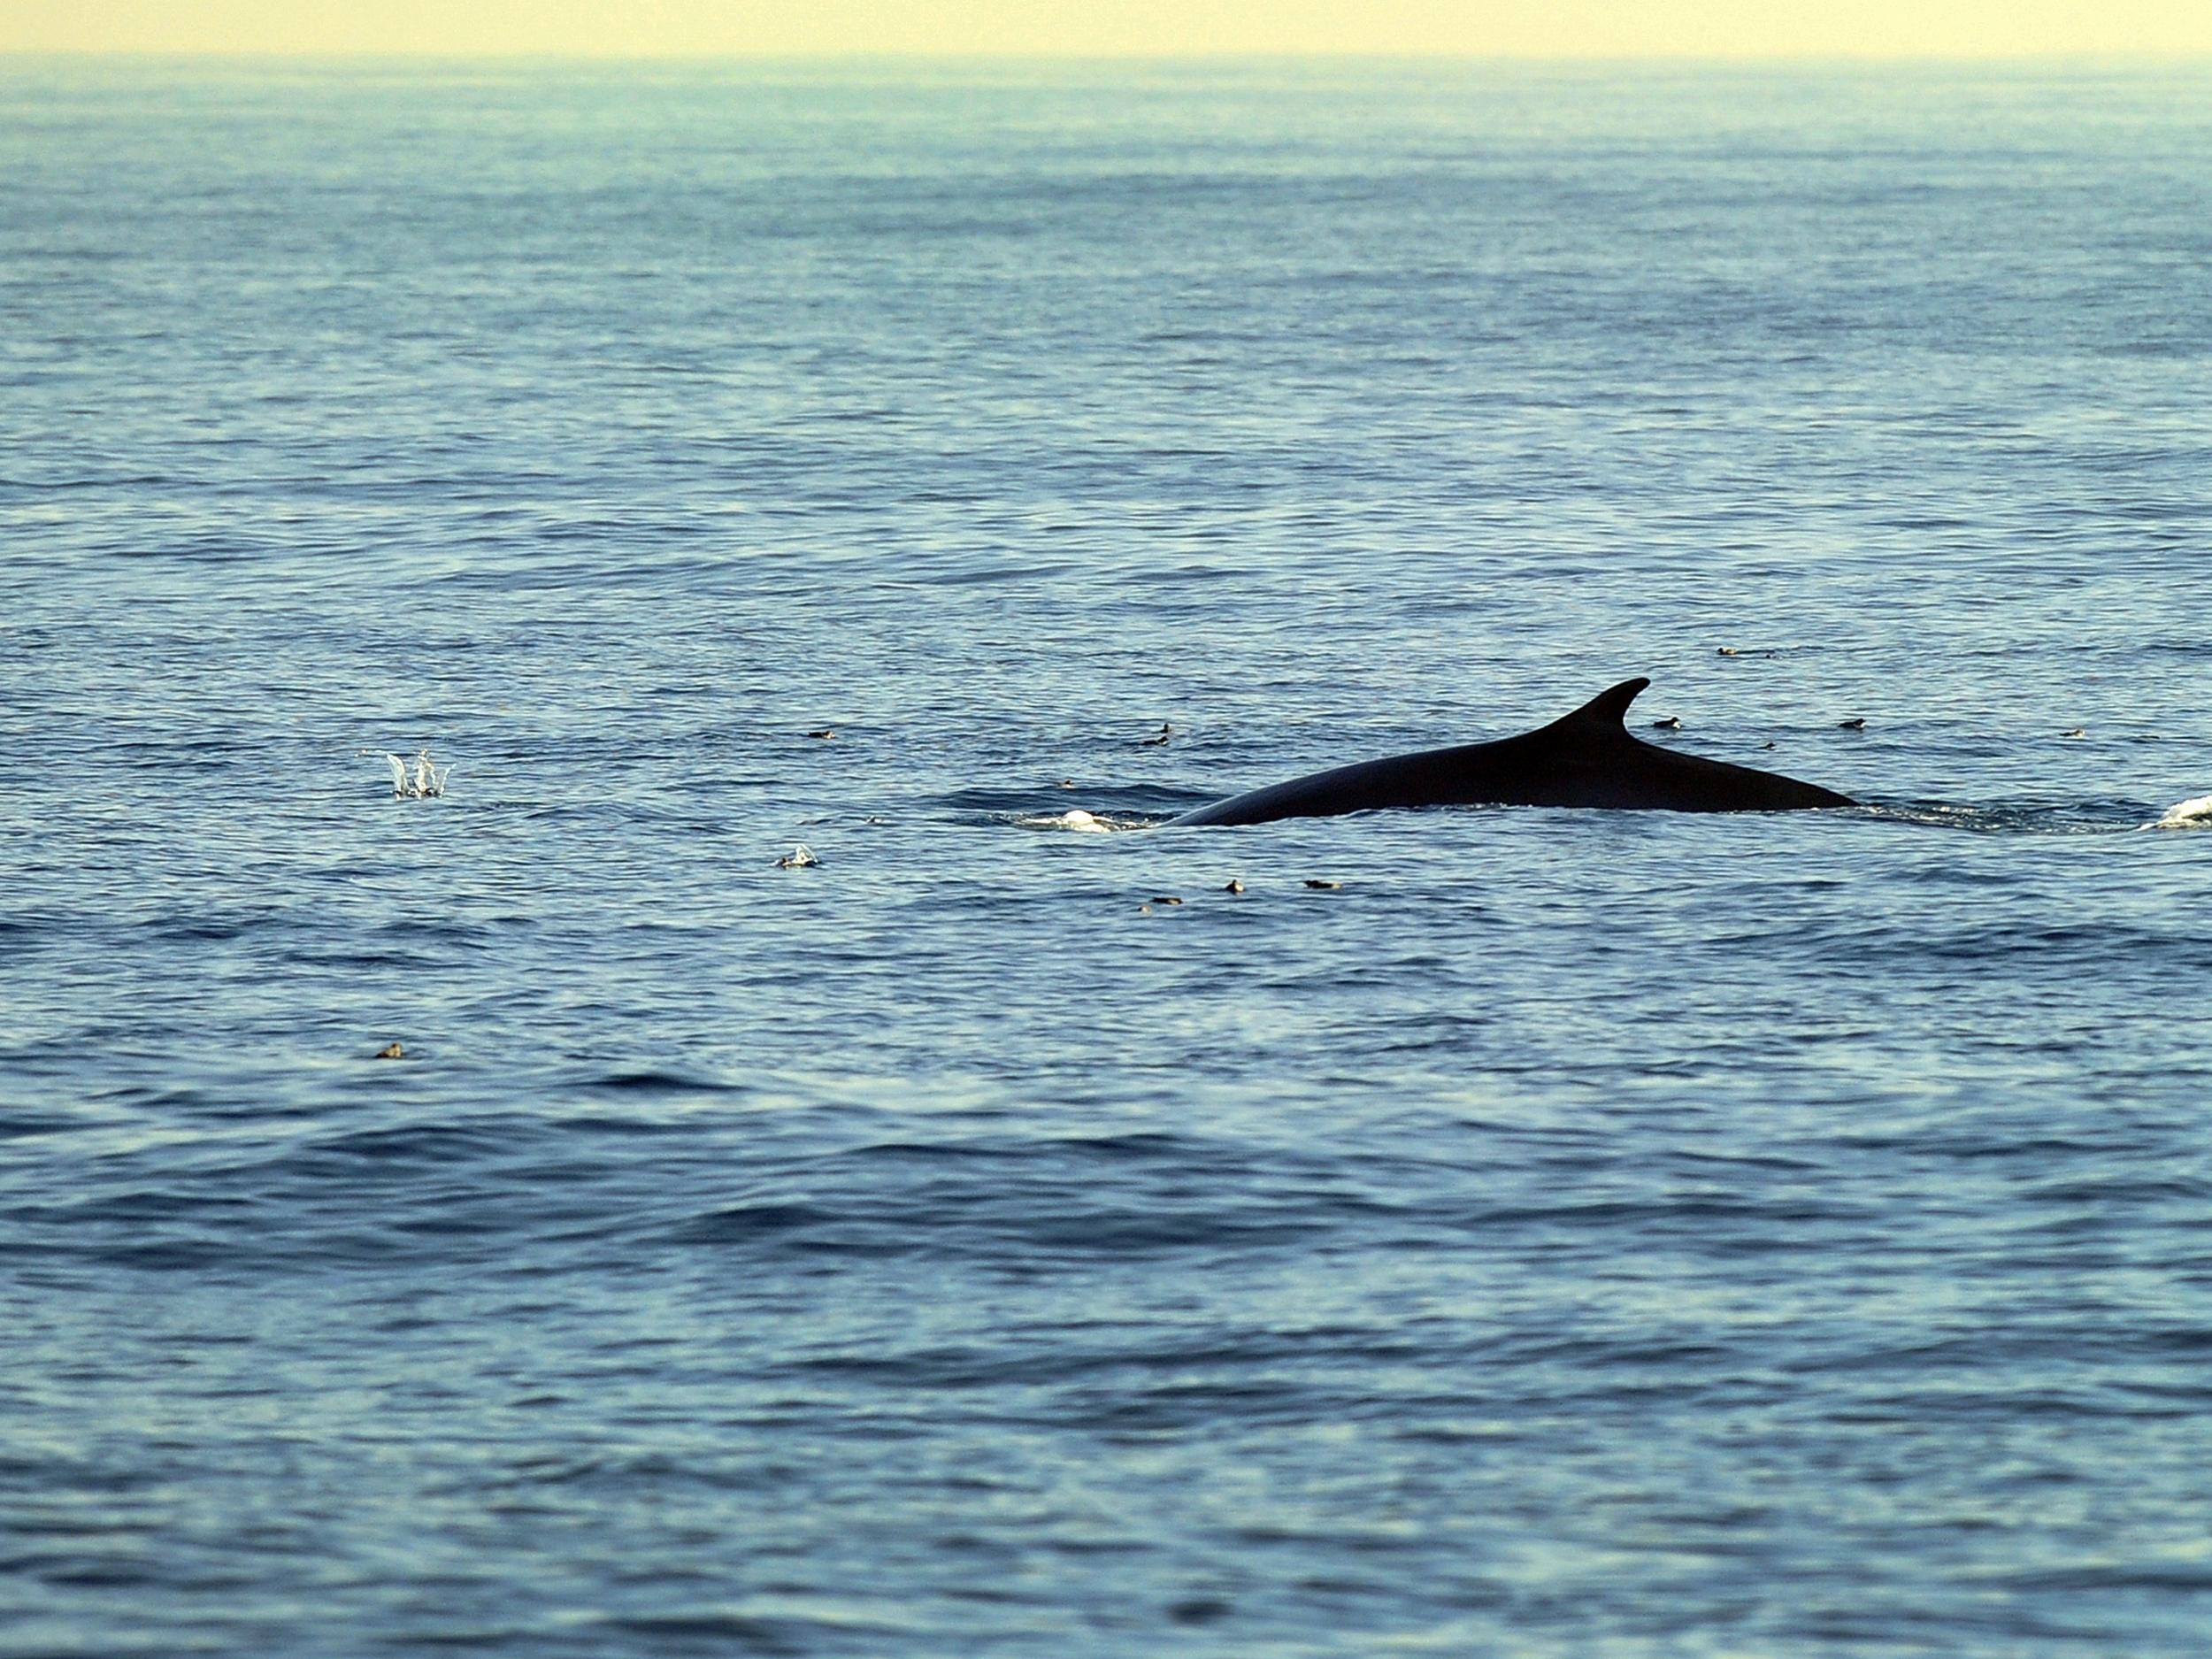 &#13;
A Fin whale, which grows up to nearly 27 metres (88 feet), can live up to around 85 to 90 years &#13;